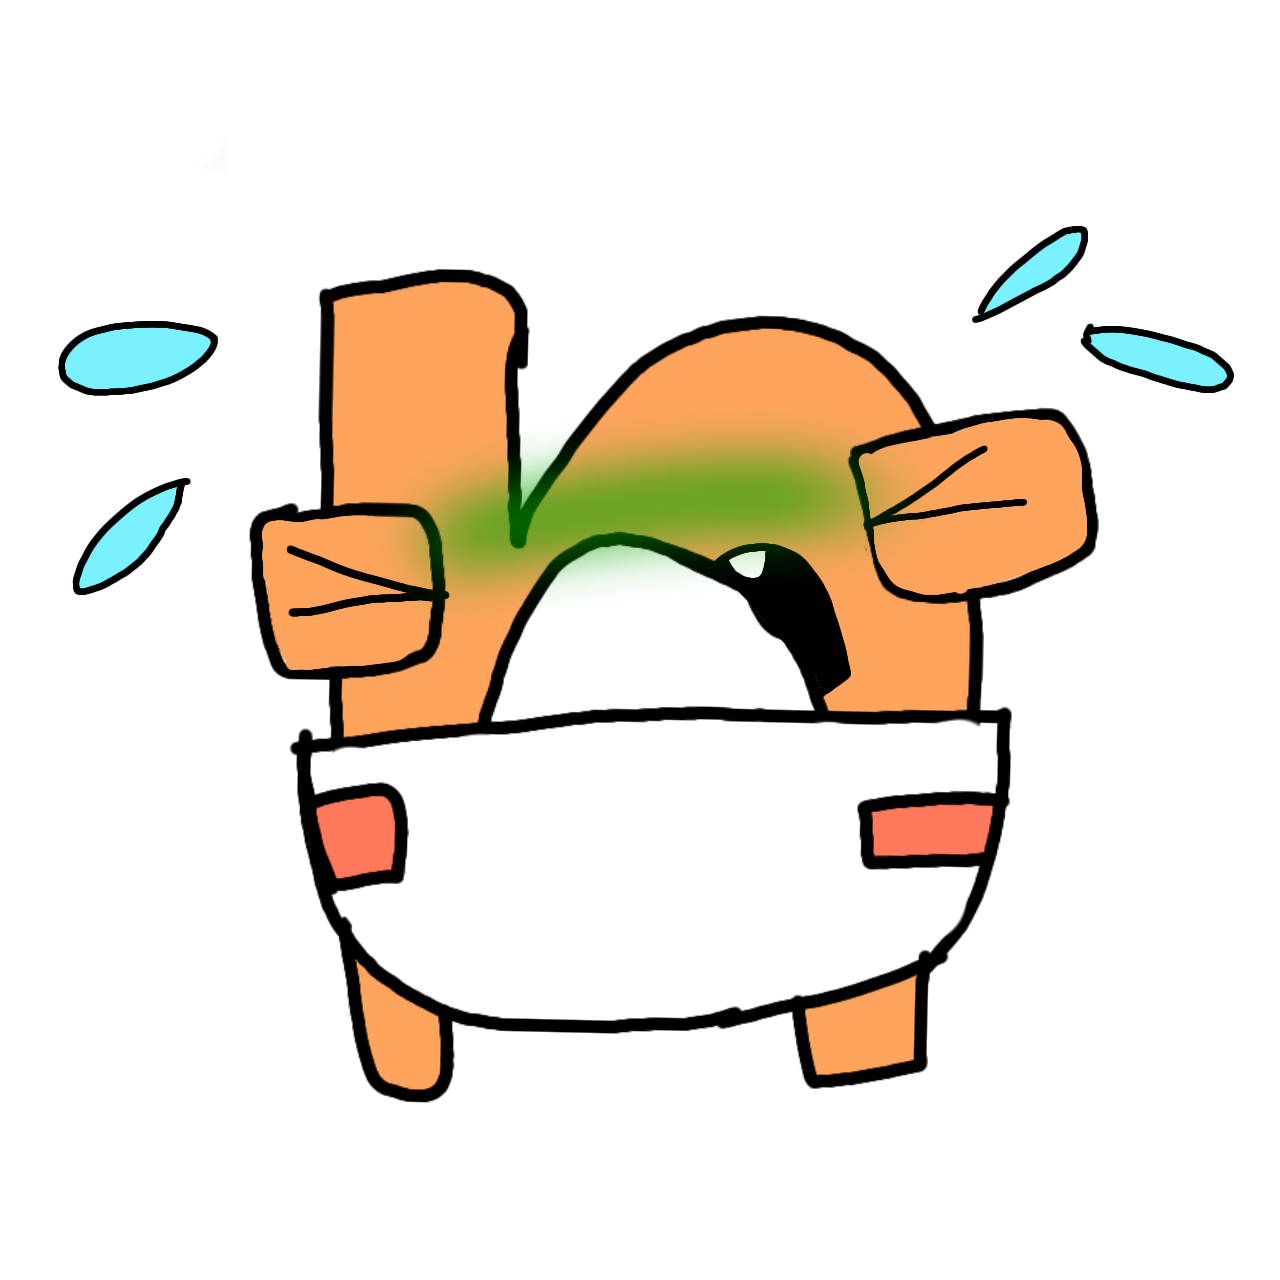 Baby F crying because he's sick by SparkyAnimate1205 on DeviantArt